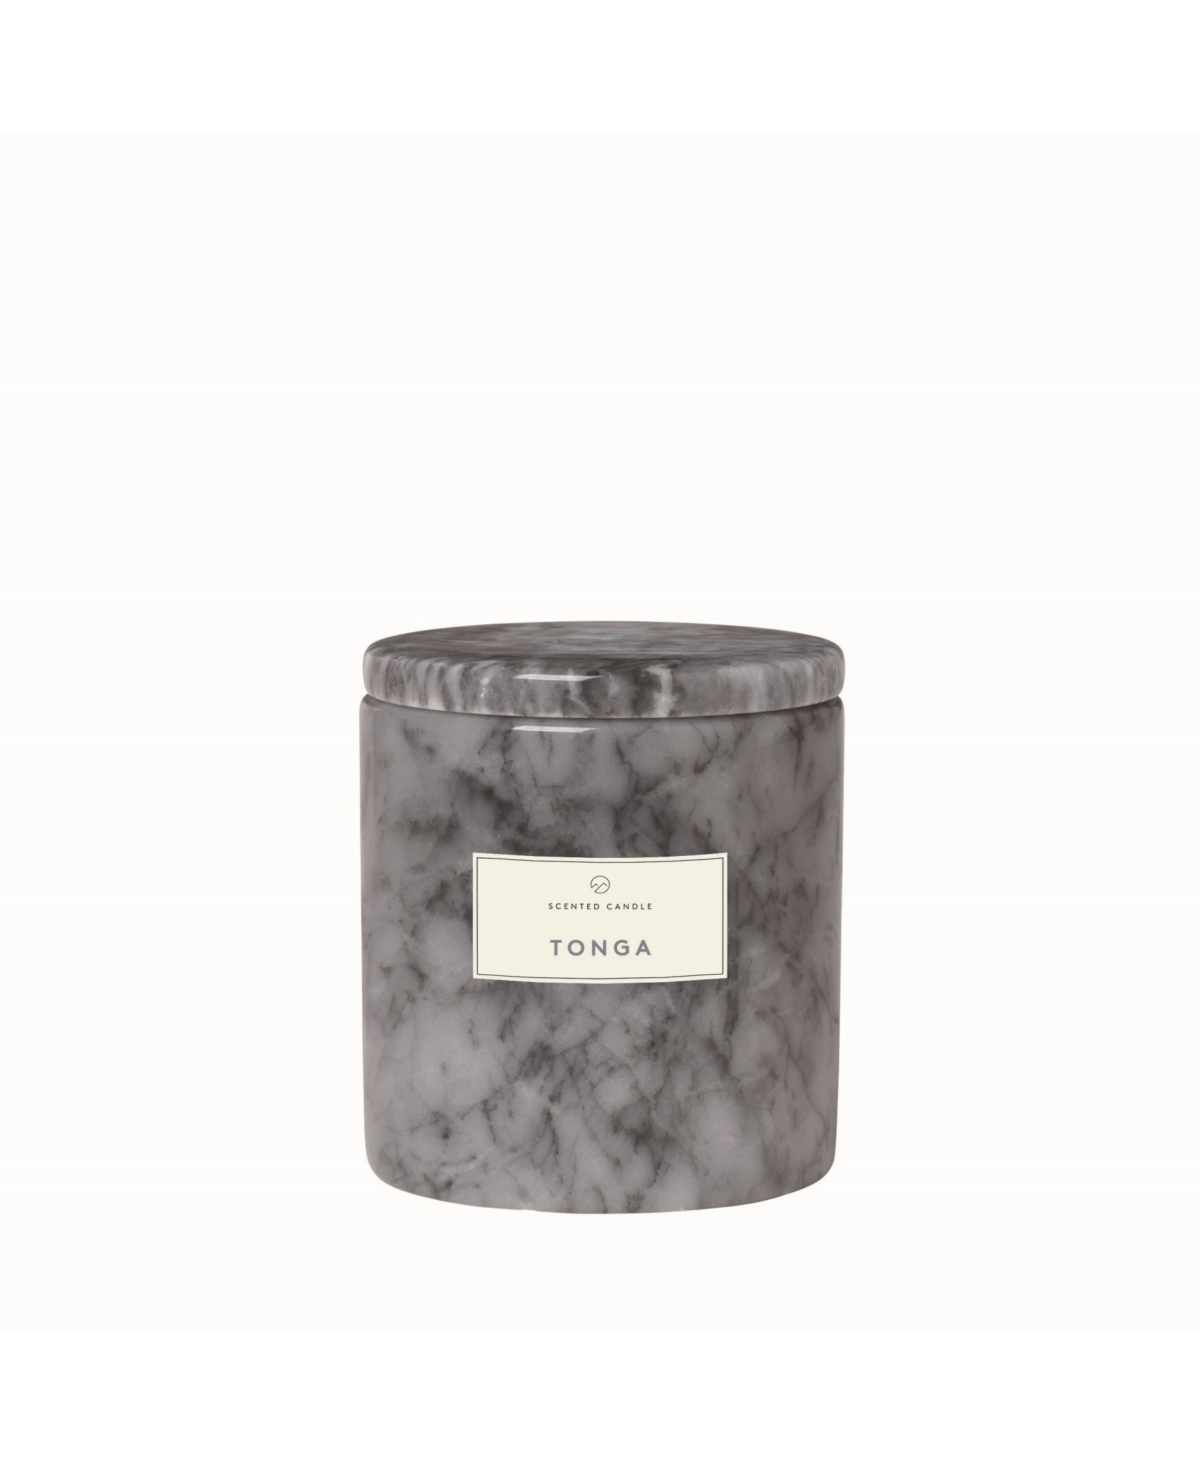 Frable Tonga Fragrance Scented Candle, 7 oz